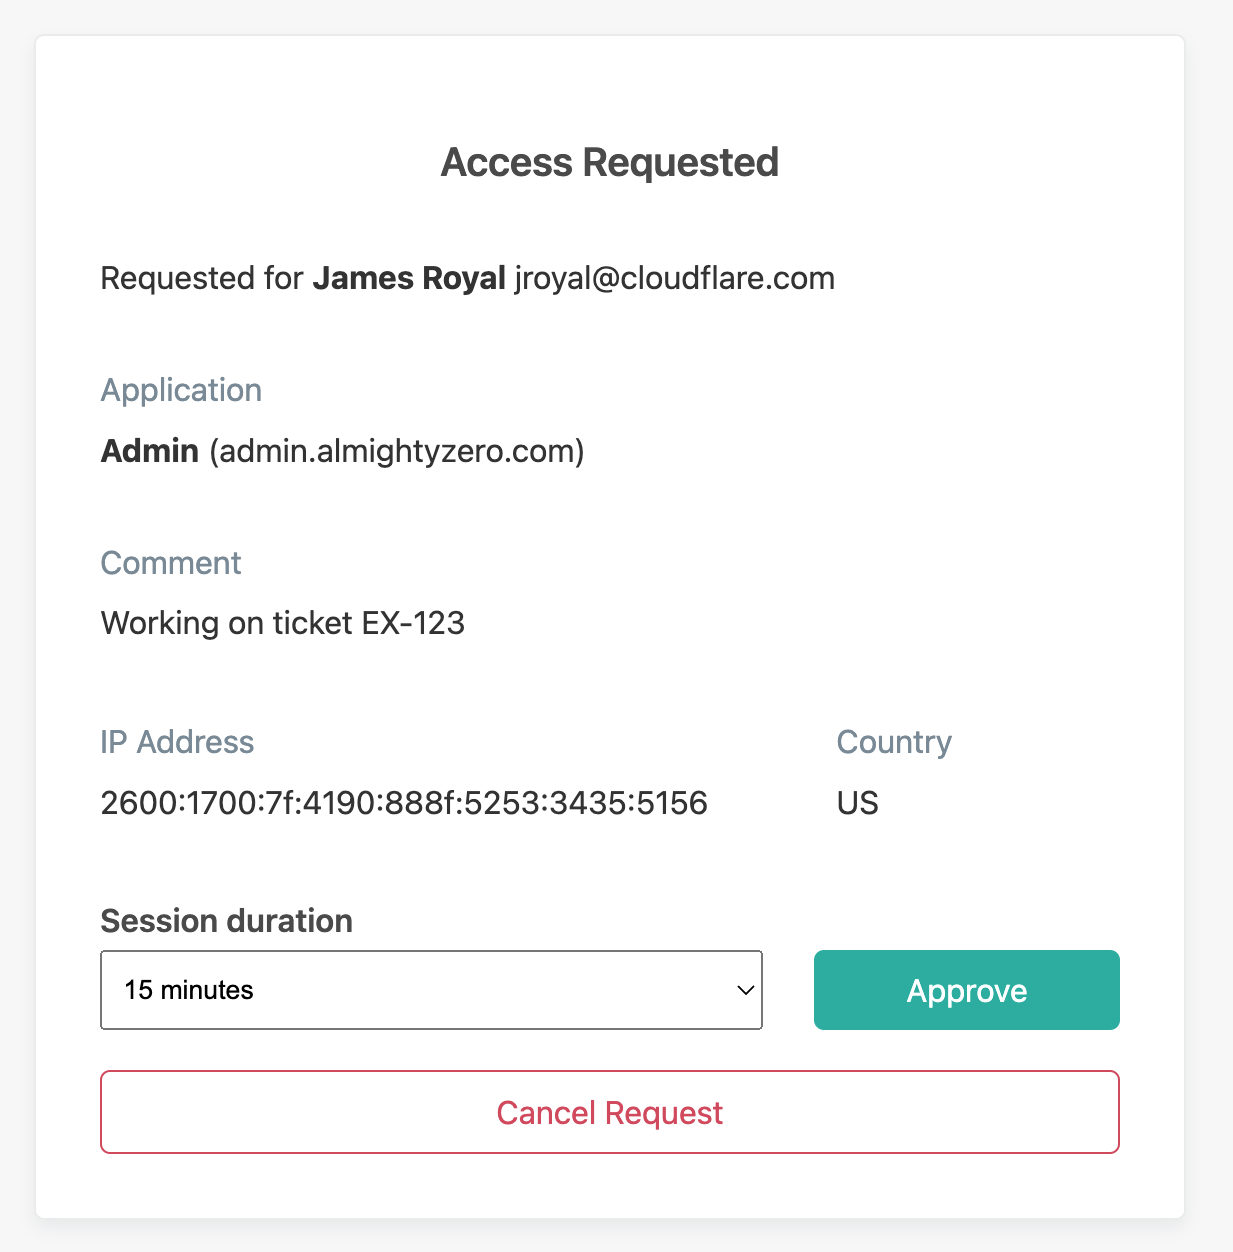 Temporary authentication approval page shown to administrators